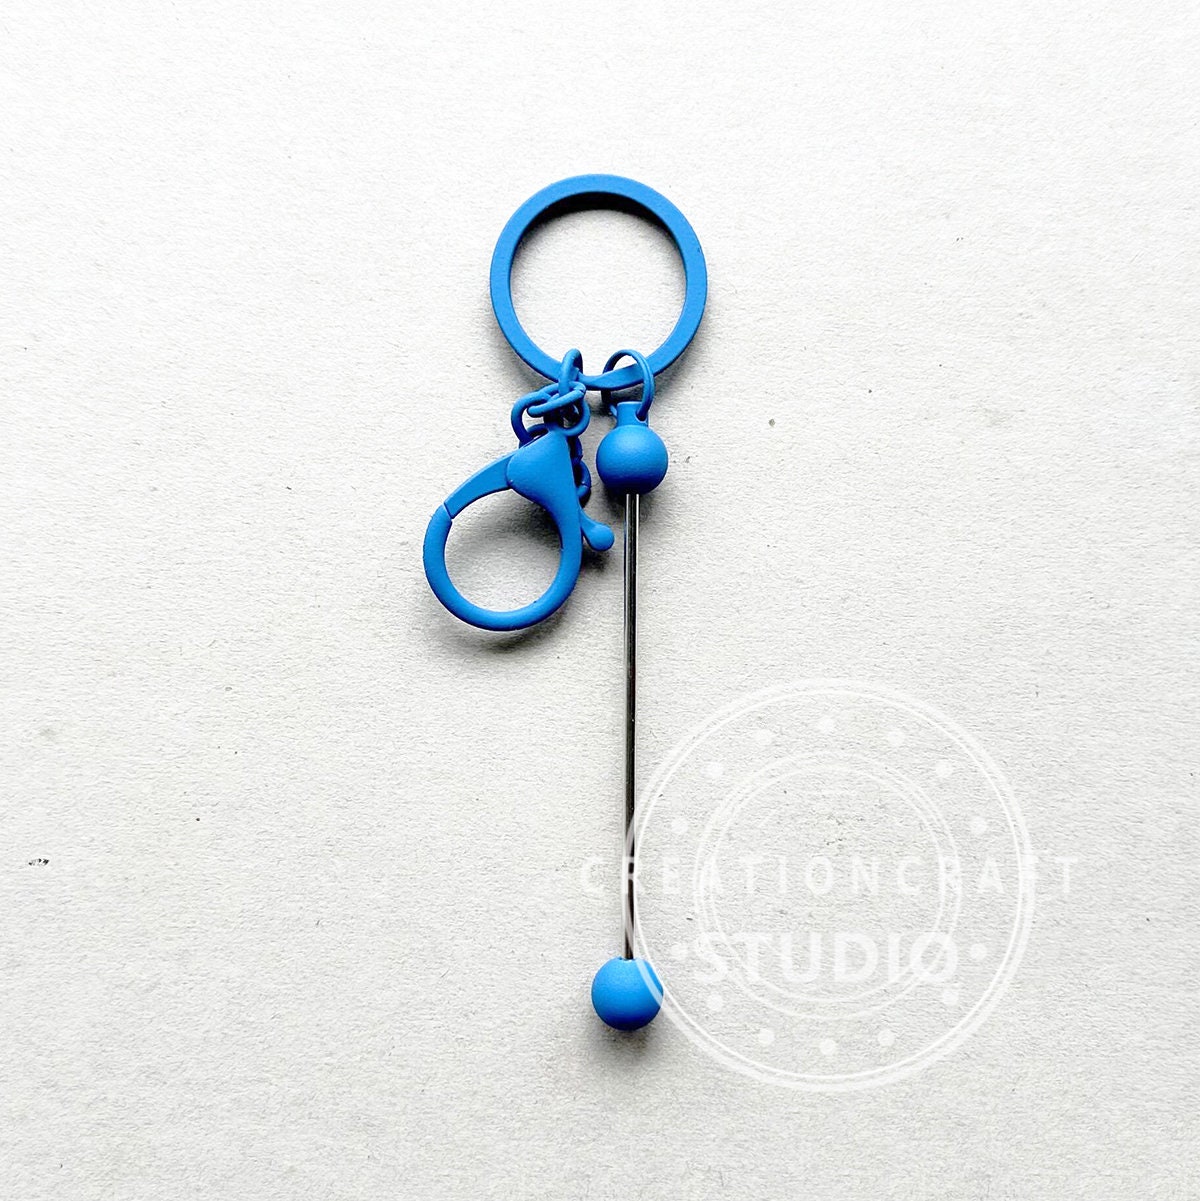 Wholesale Iron Bar Beadable Keychain for Jewelry Making DIY Crafts 